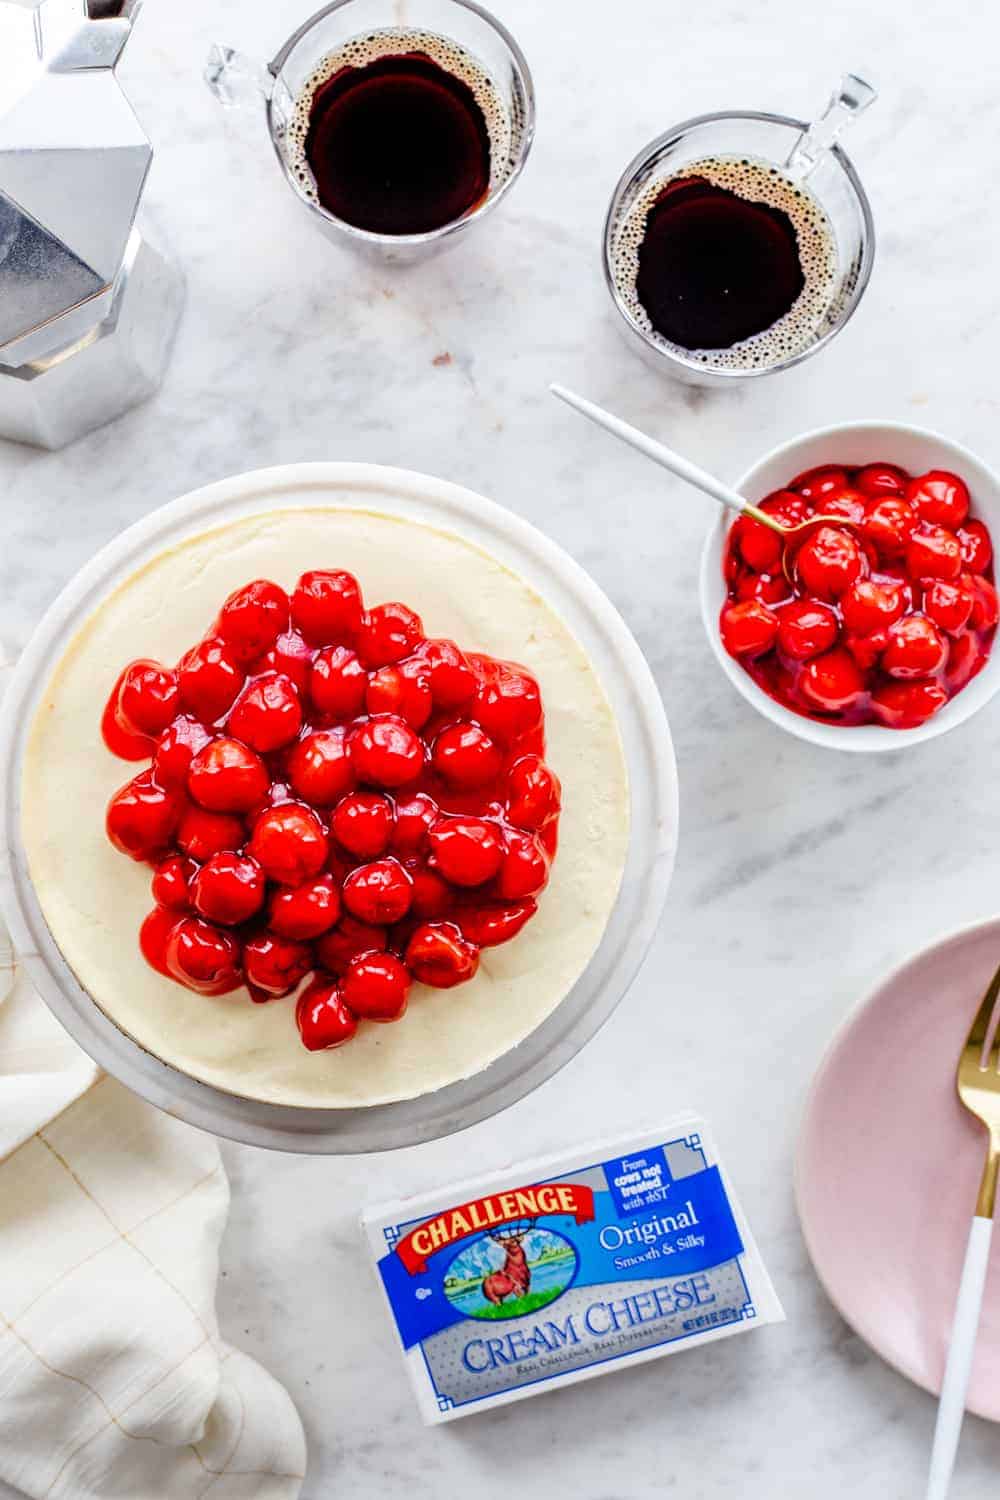 Instant Pot Cheesecake couldn't be easier or more delicious! 